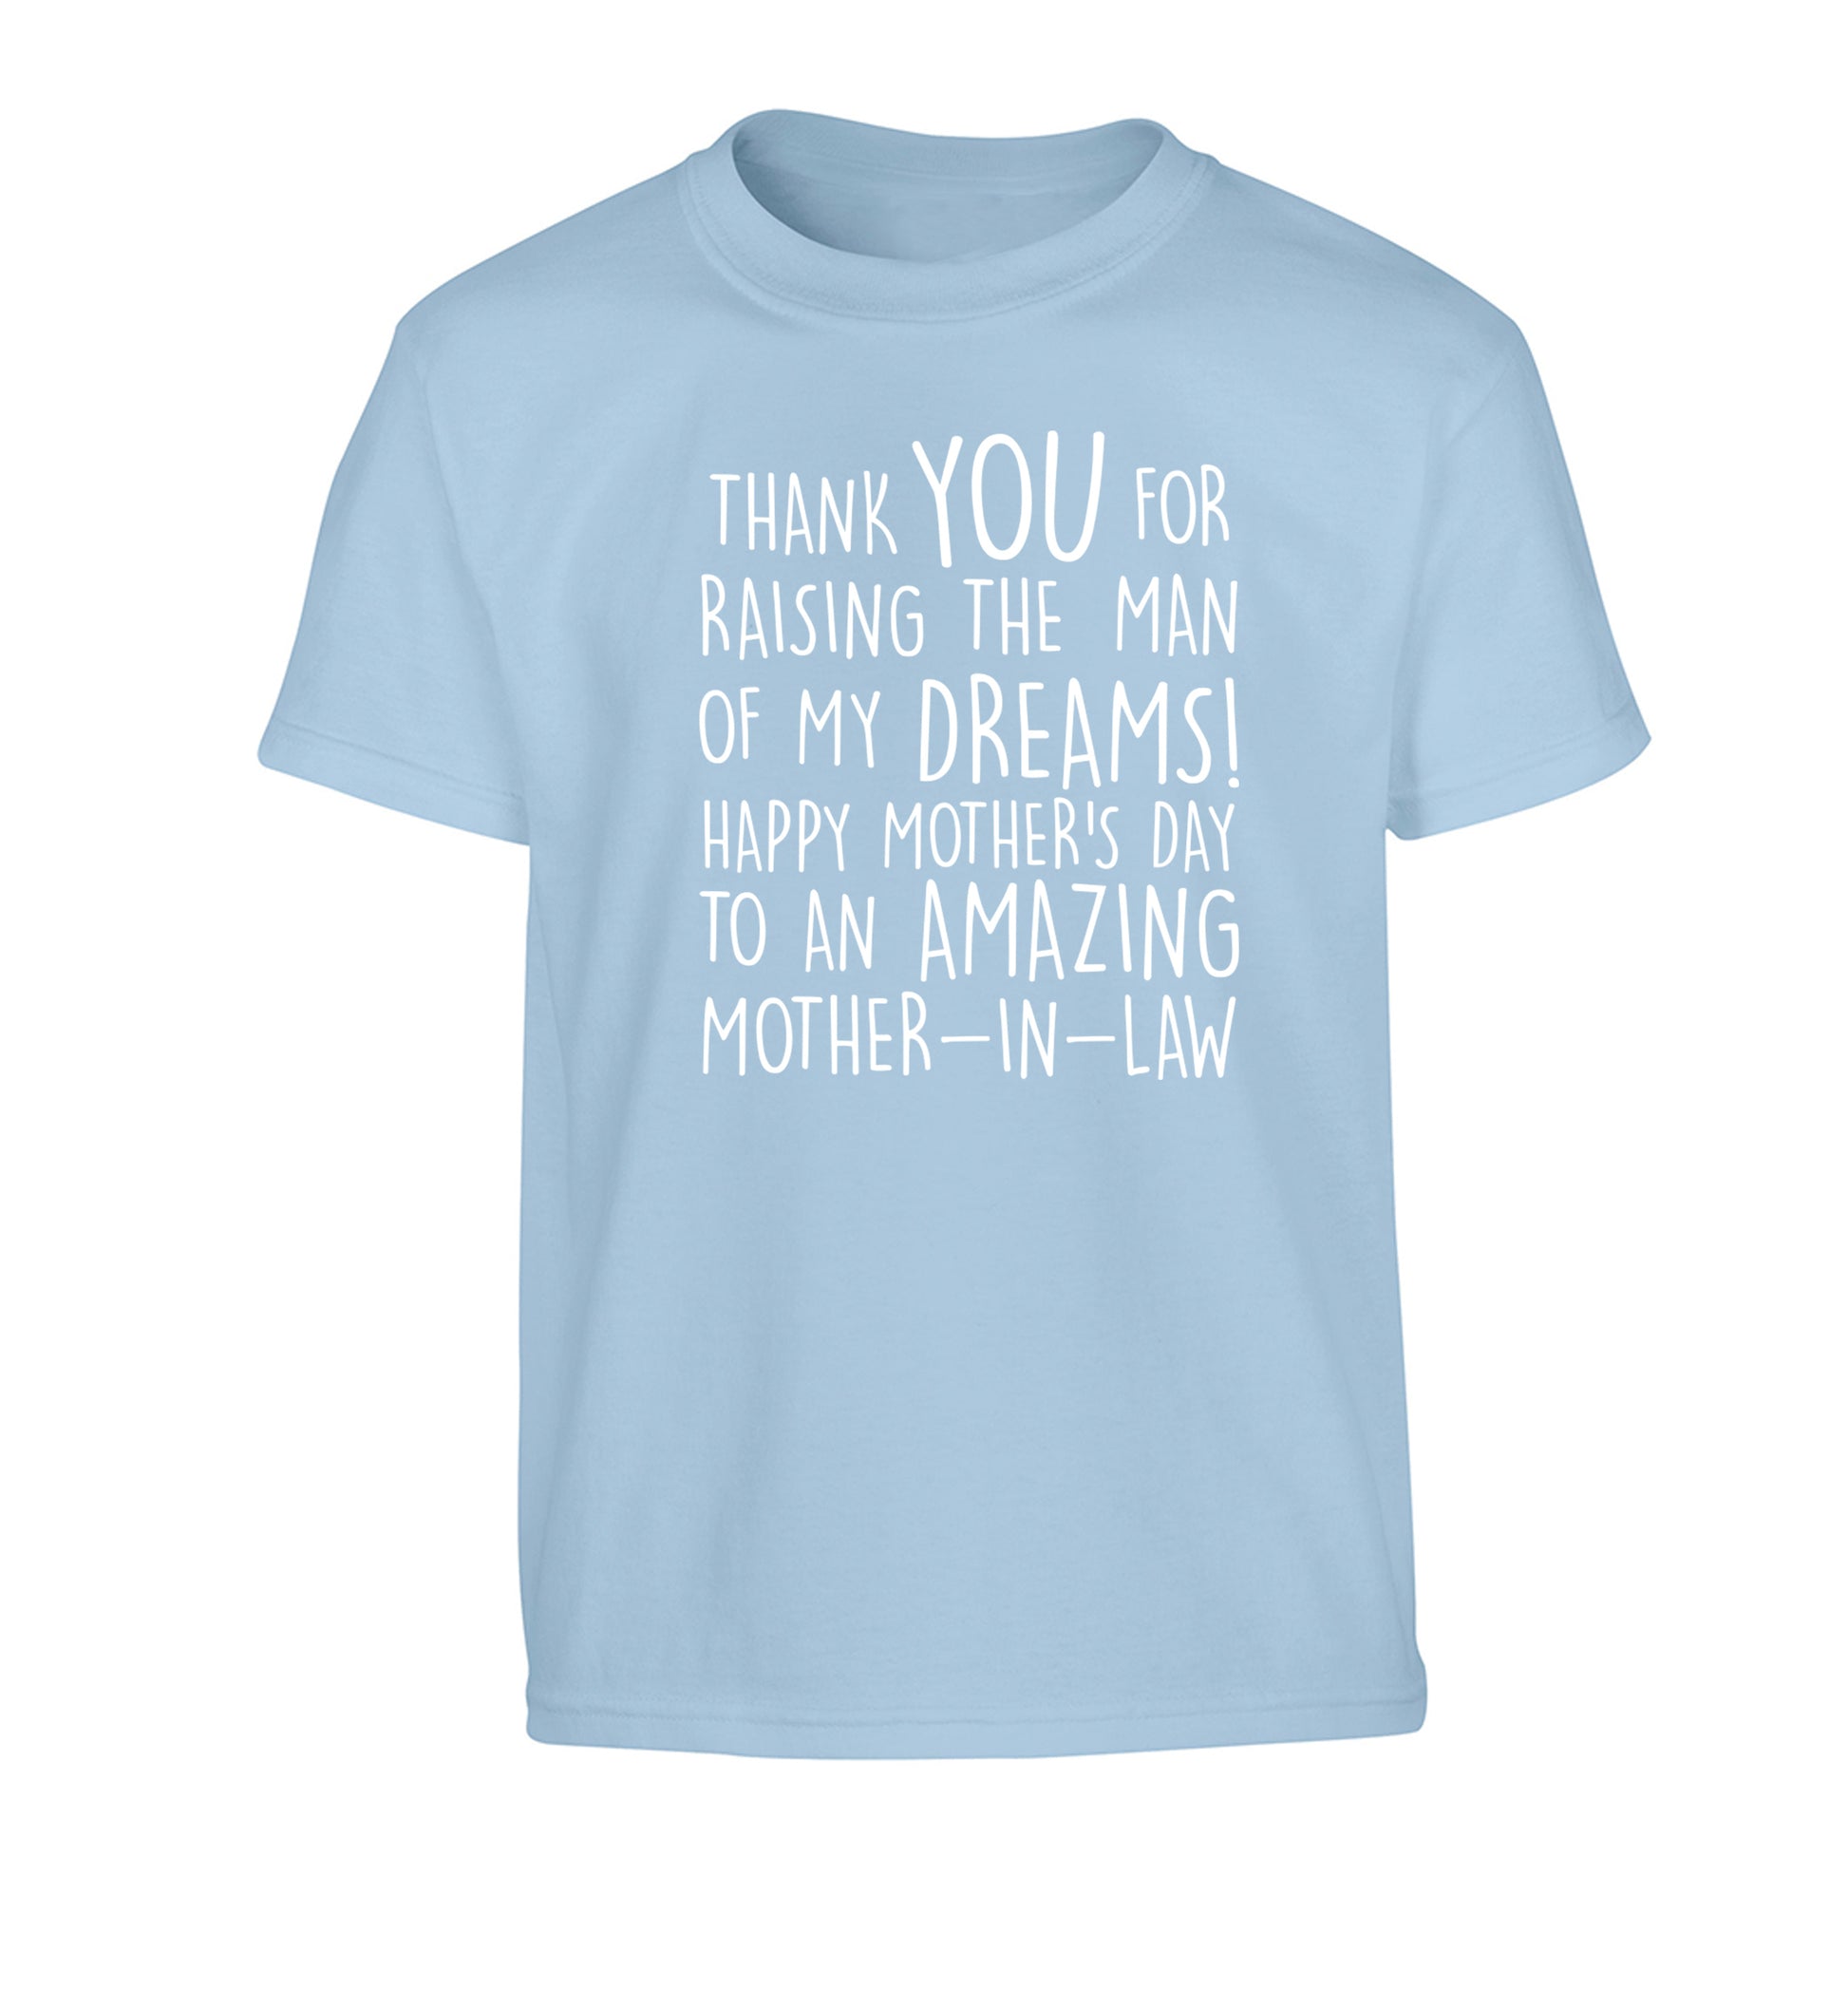 Thank you for raising the man of my dreams happy mother's day mother-in-law Children's light blue Tshirt 12-13 Years